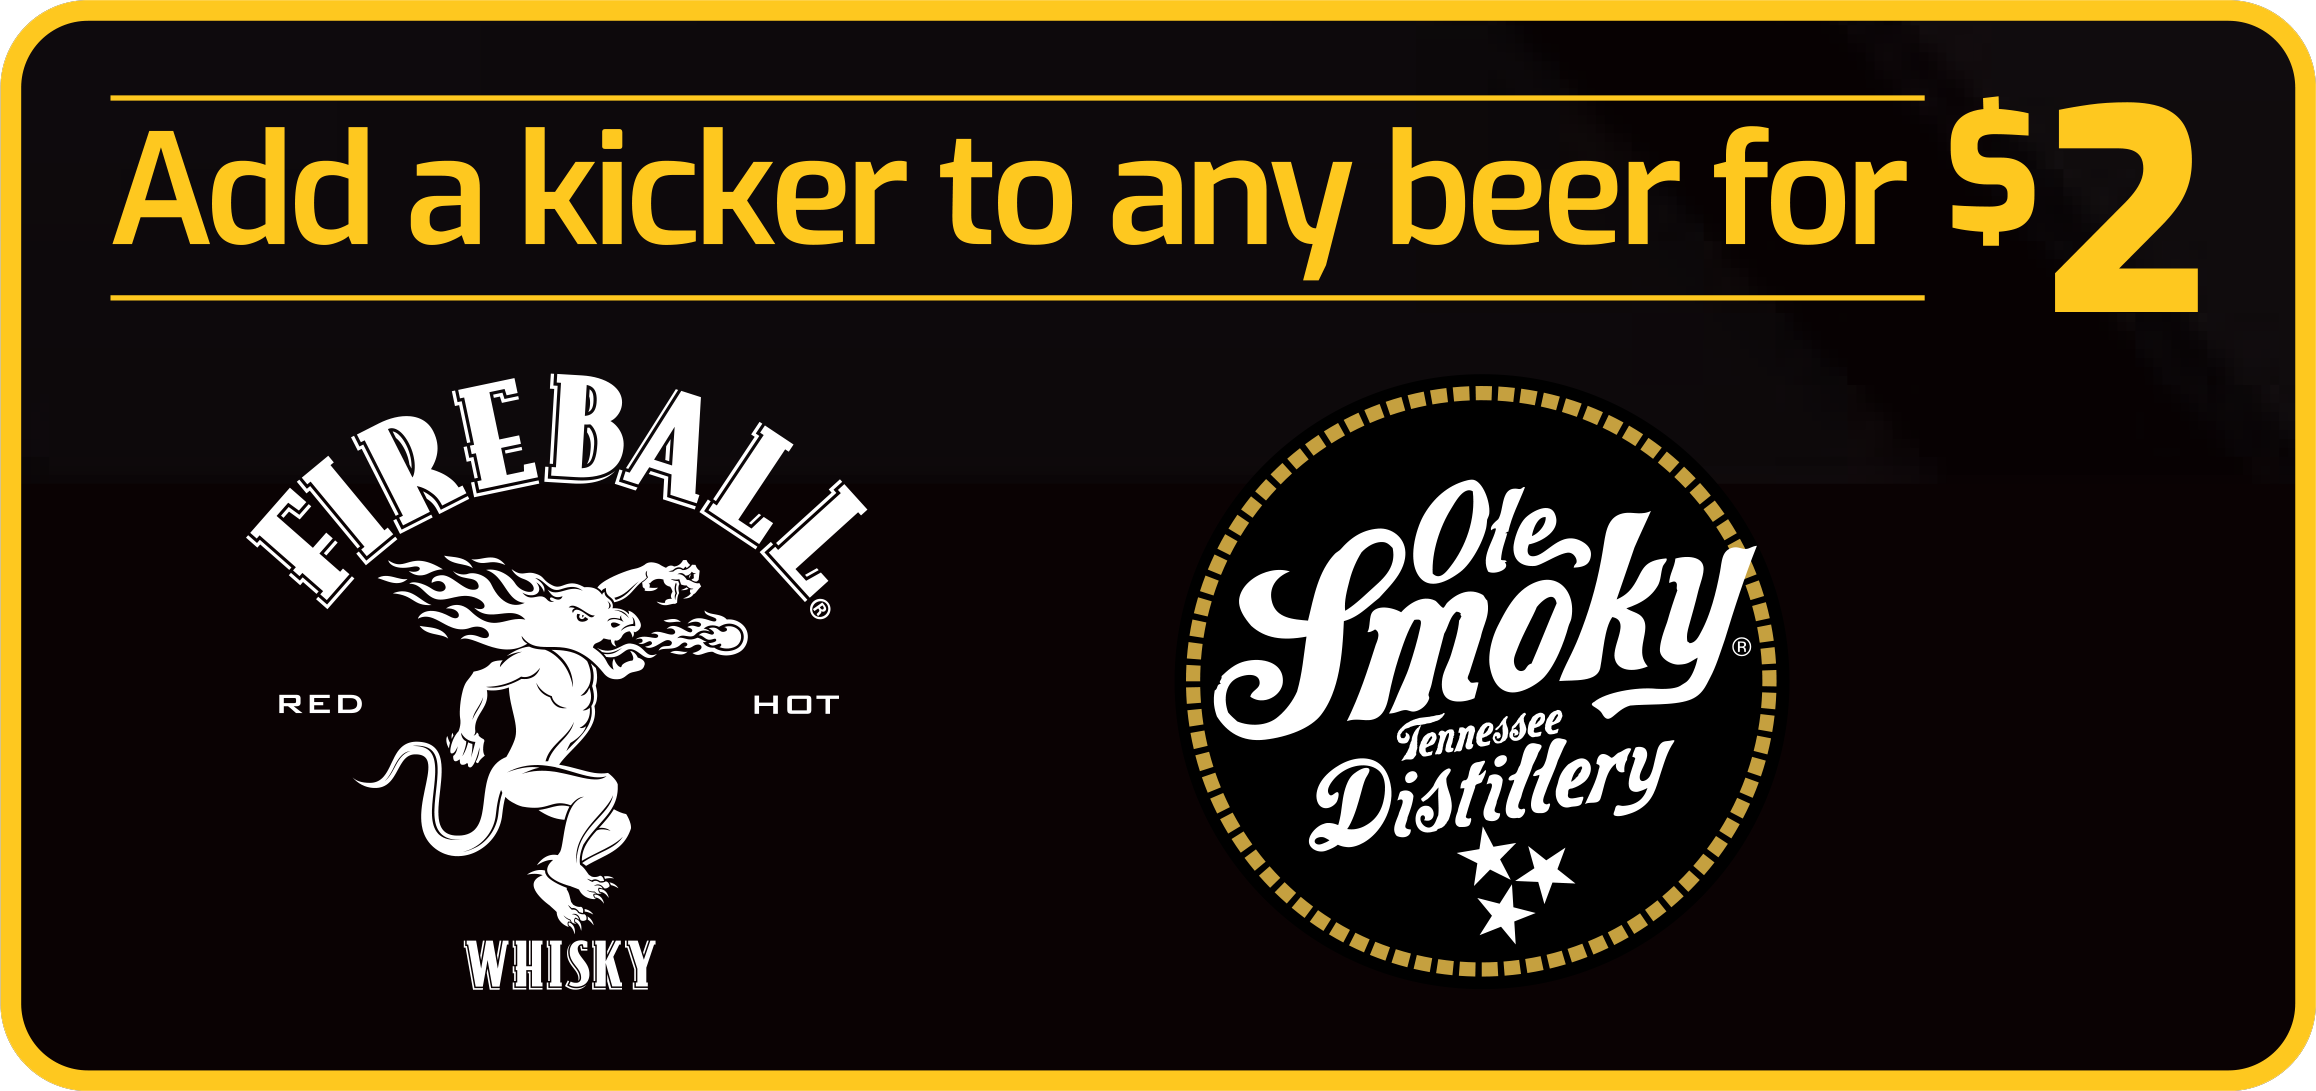 add a kicker to any beer for two dollars. Fireball whisky or ole smoky whisky  